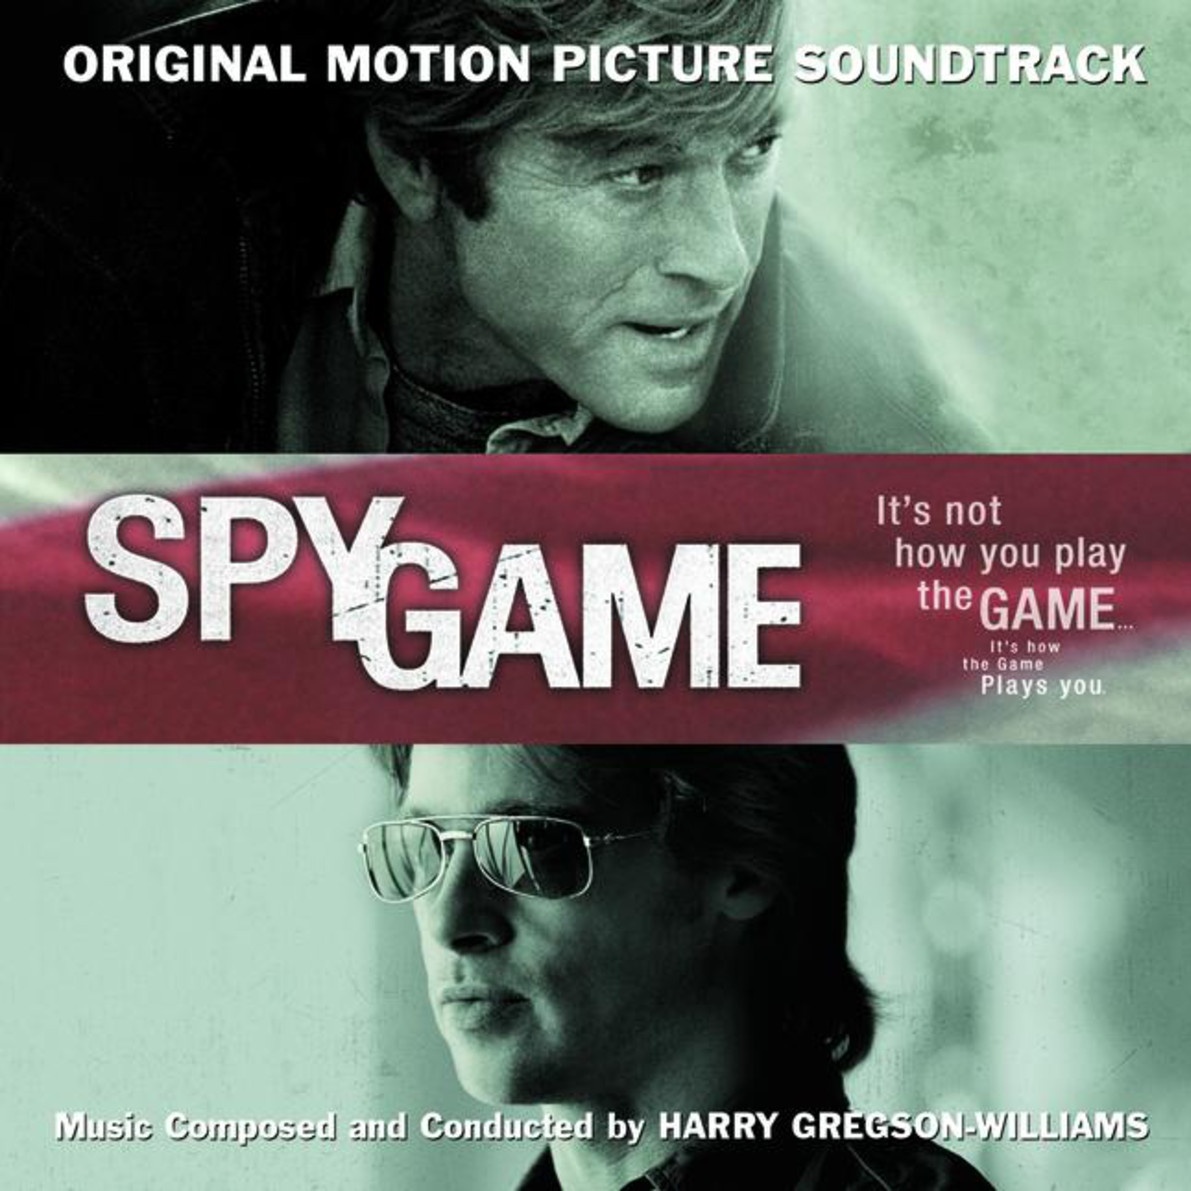 "...He's Been Arrested For Espionage" - Original Motion Picture Soundtrack